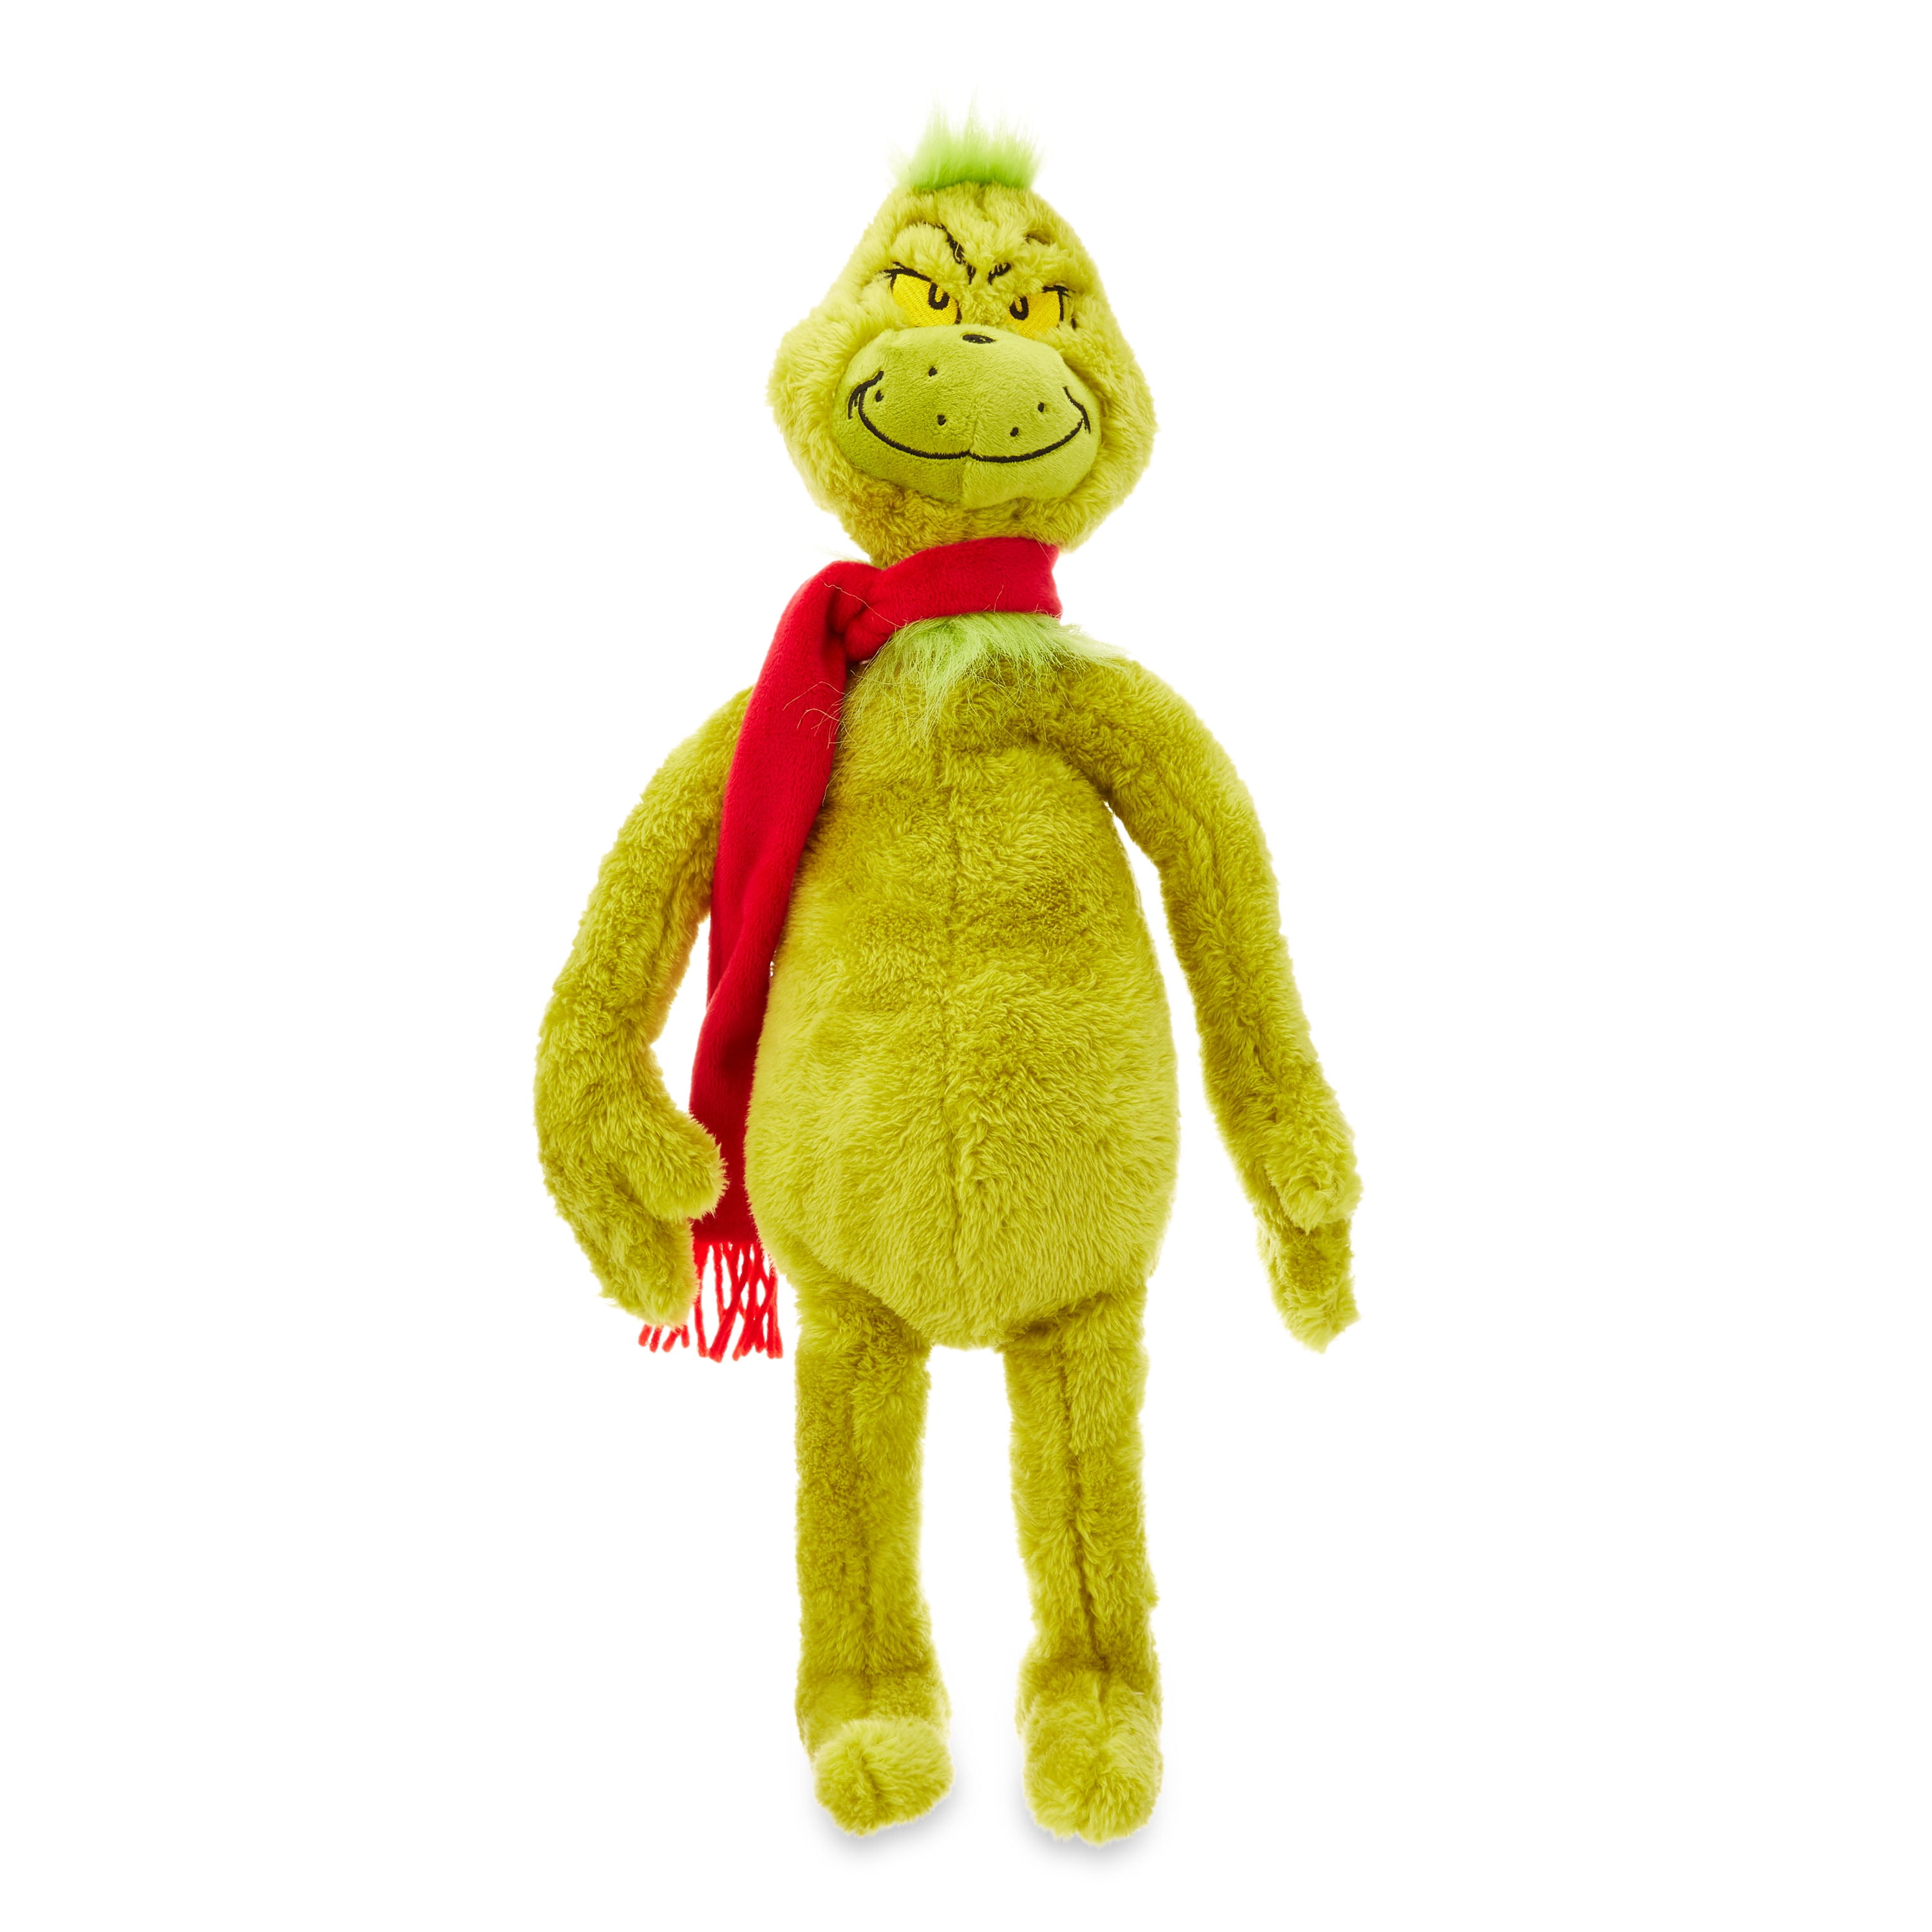 Dr. Seuss' The Grinch Who Stole Christmas Dr Seuss' The Grinch Who Stole Christmas, Grinch Plush with Lights, 19 inches Tall